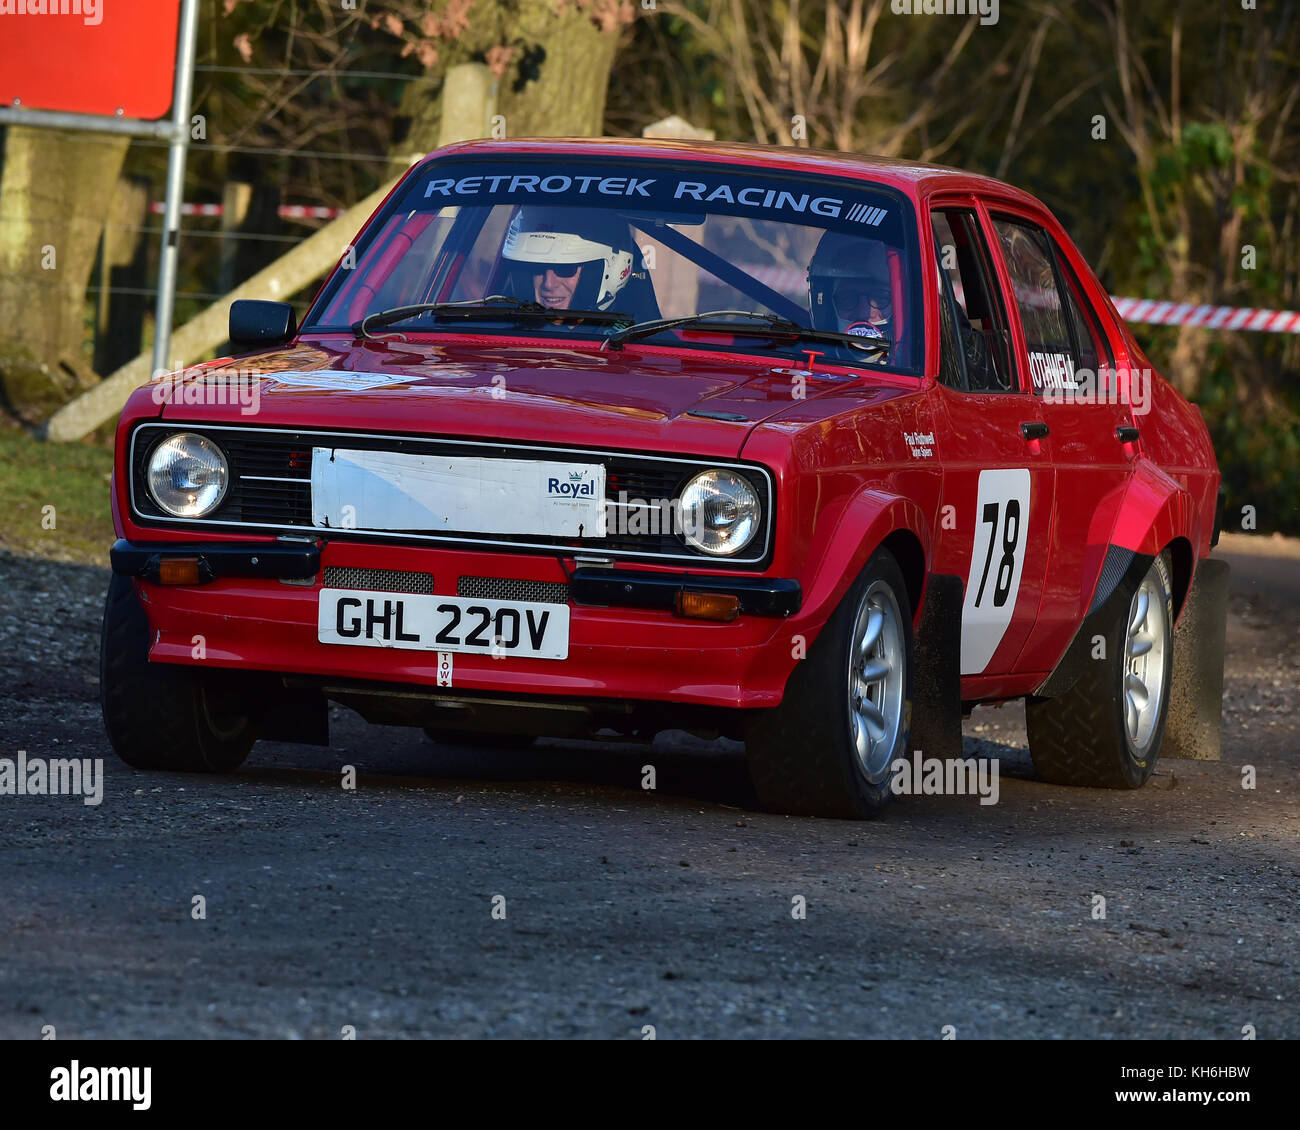 John Spiers, Paolo rothwell, Ford Escort, mgj rally stadi, Chelmsford motor club, Brands Hatch, sabato, 21 gennaio 2017, msv, rally, corse, Rall Foto Stock